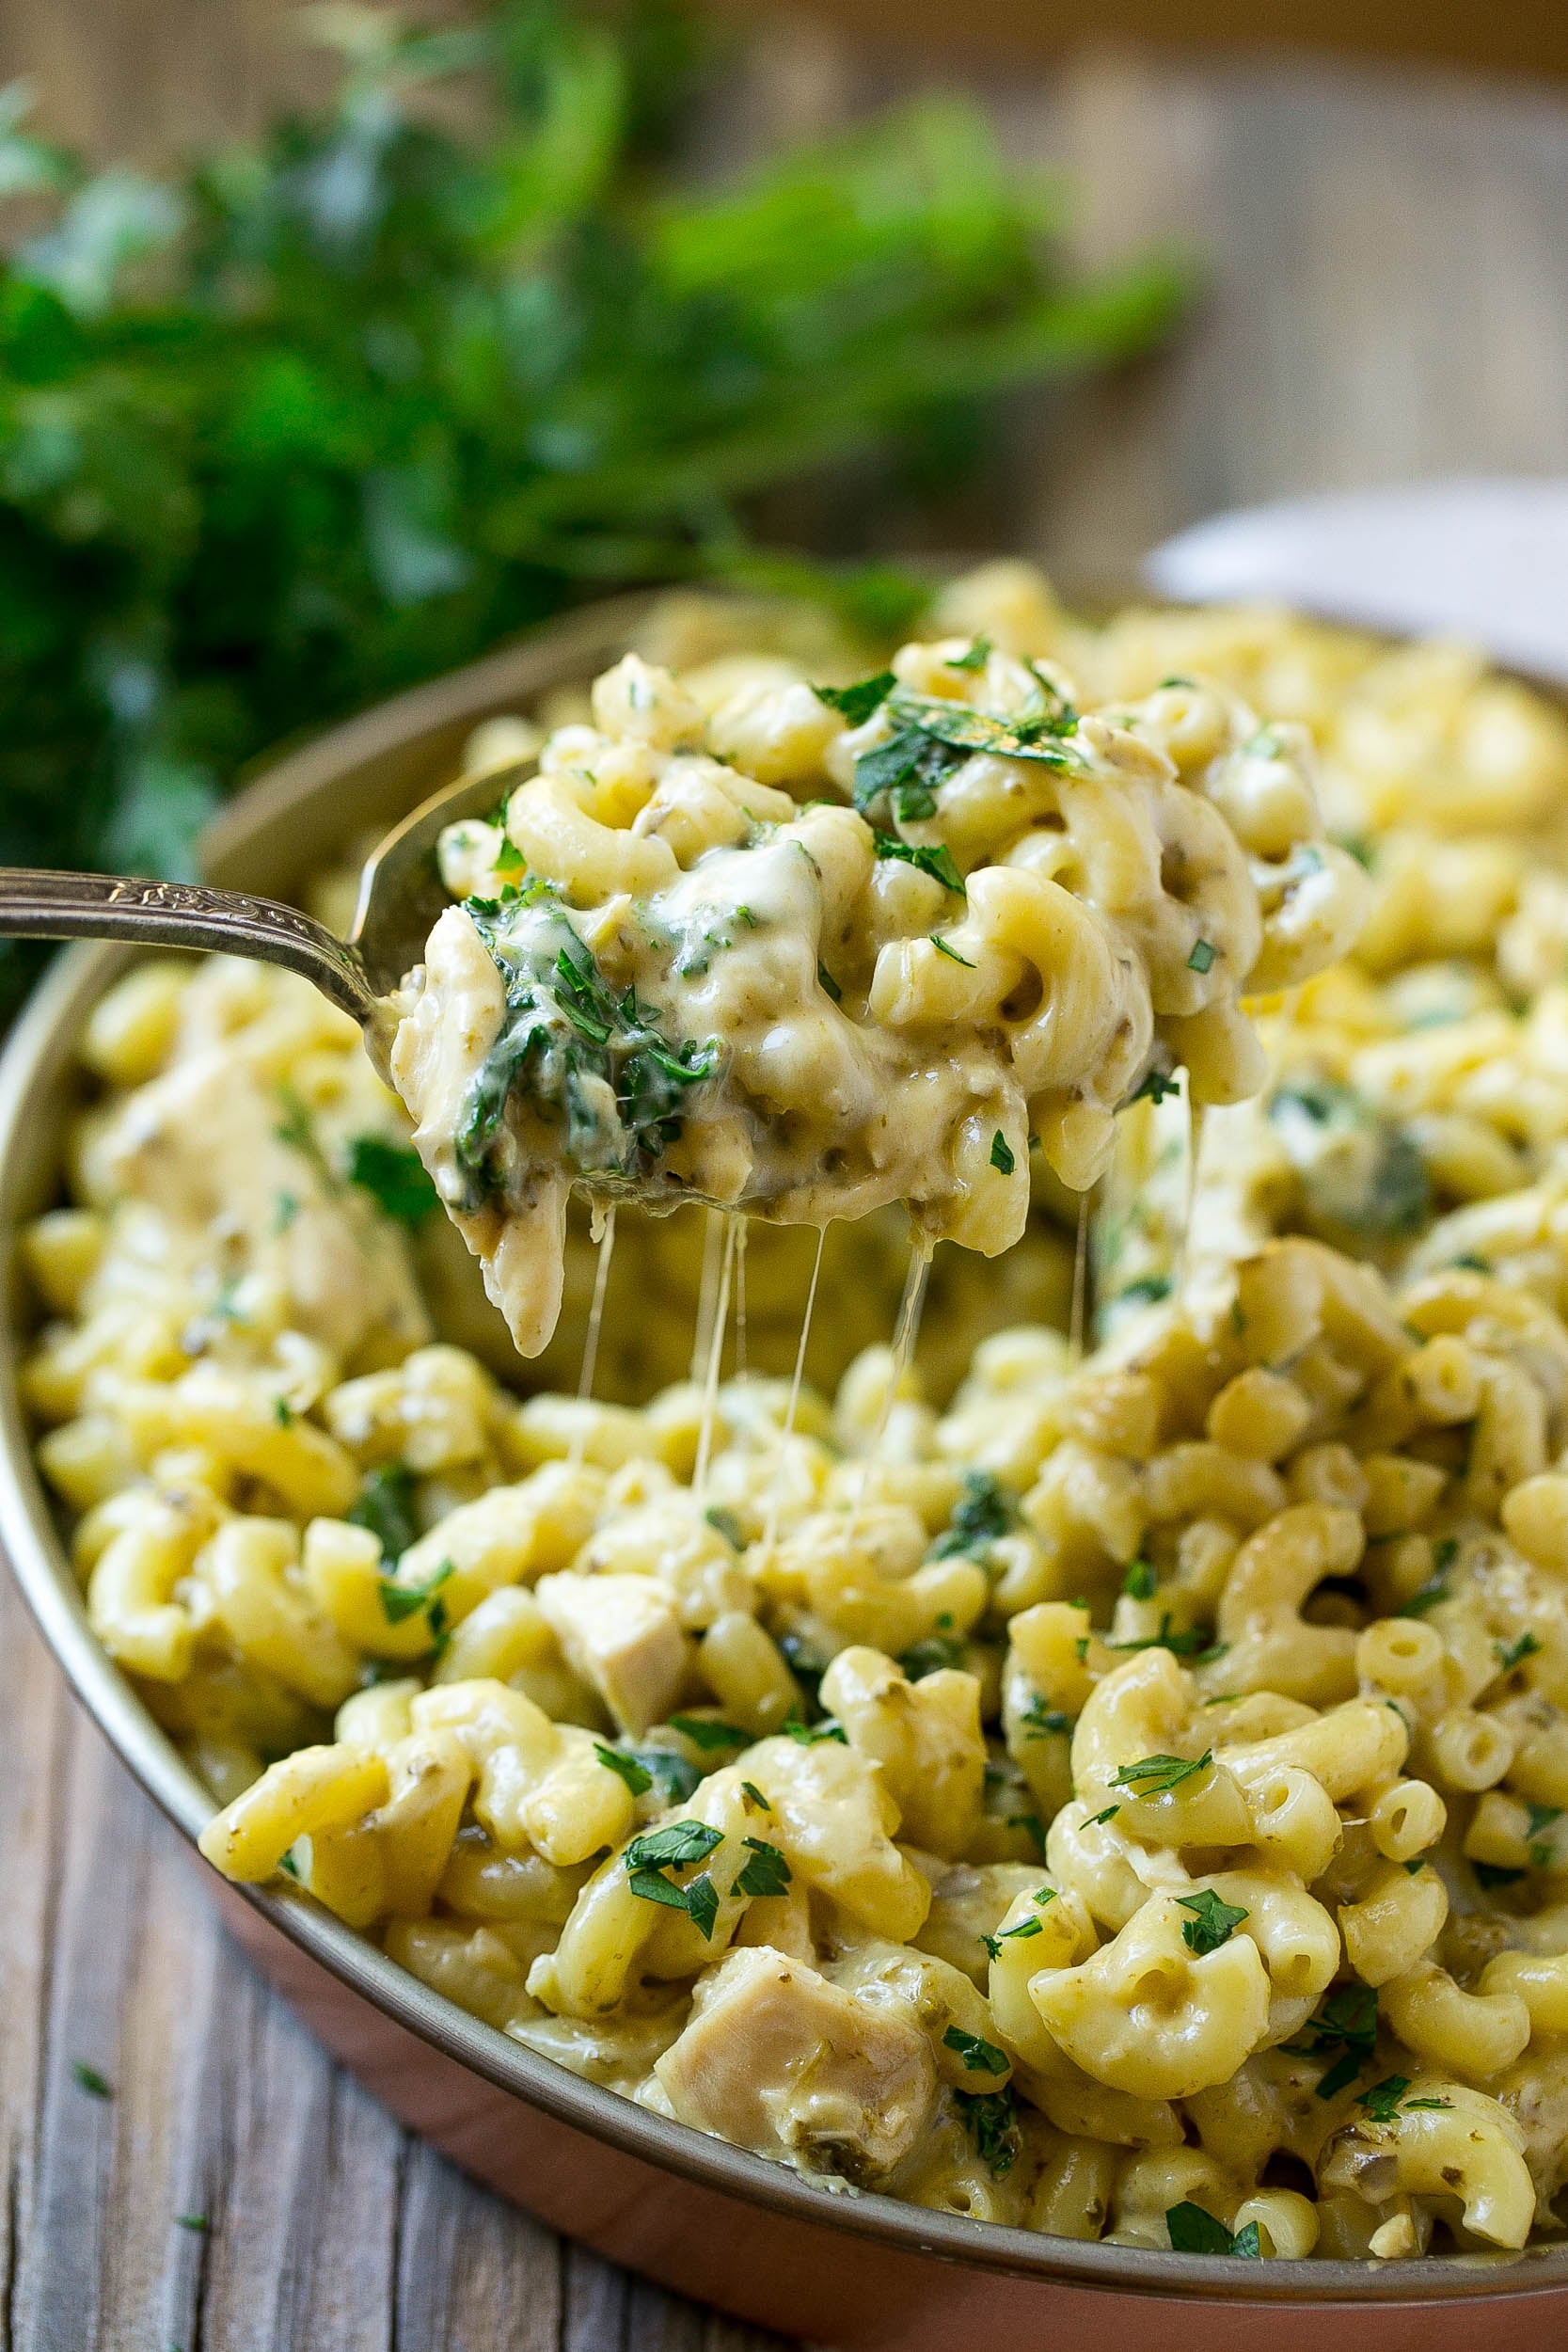 Chicken & kale pesto white cheddar mac & cheese made with Sonoma Gourmet